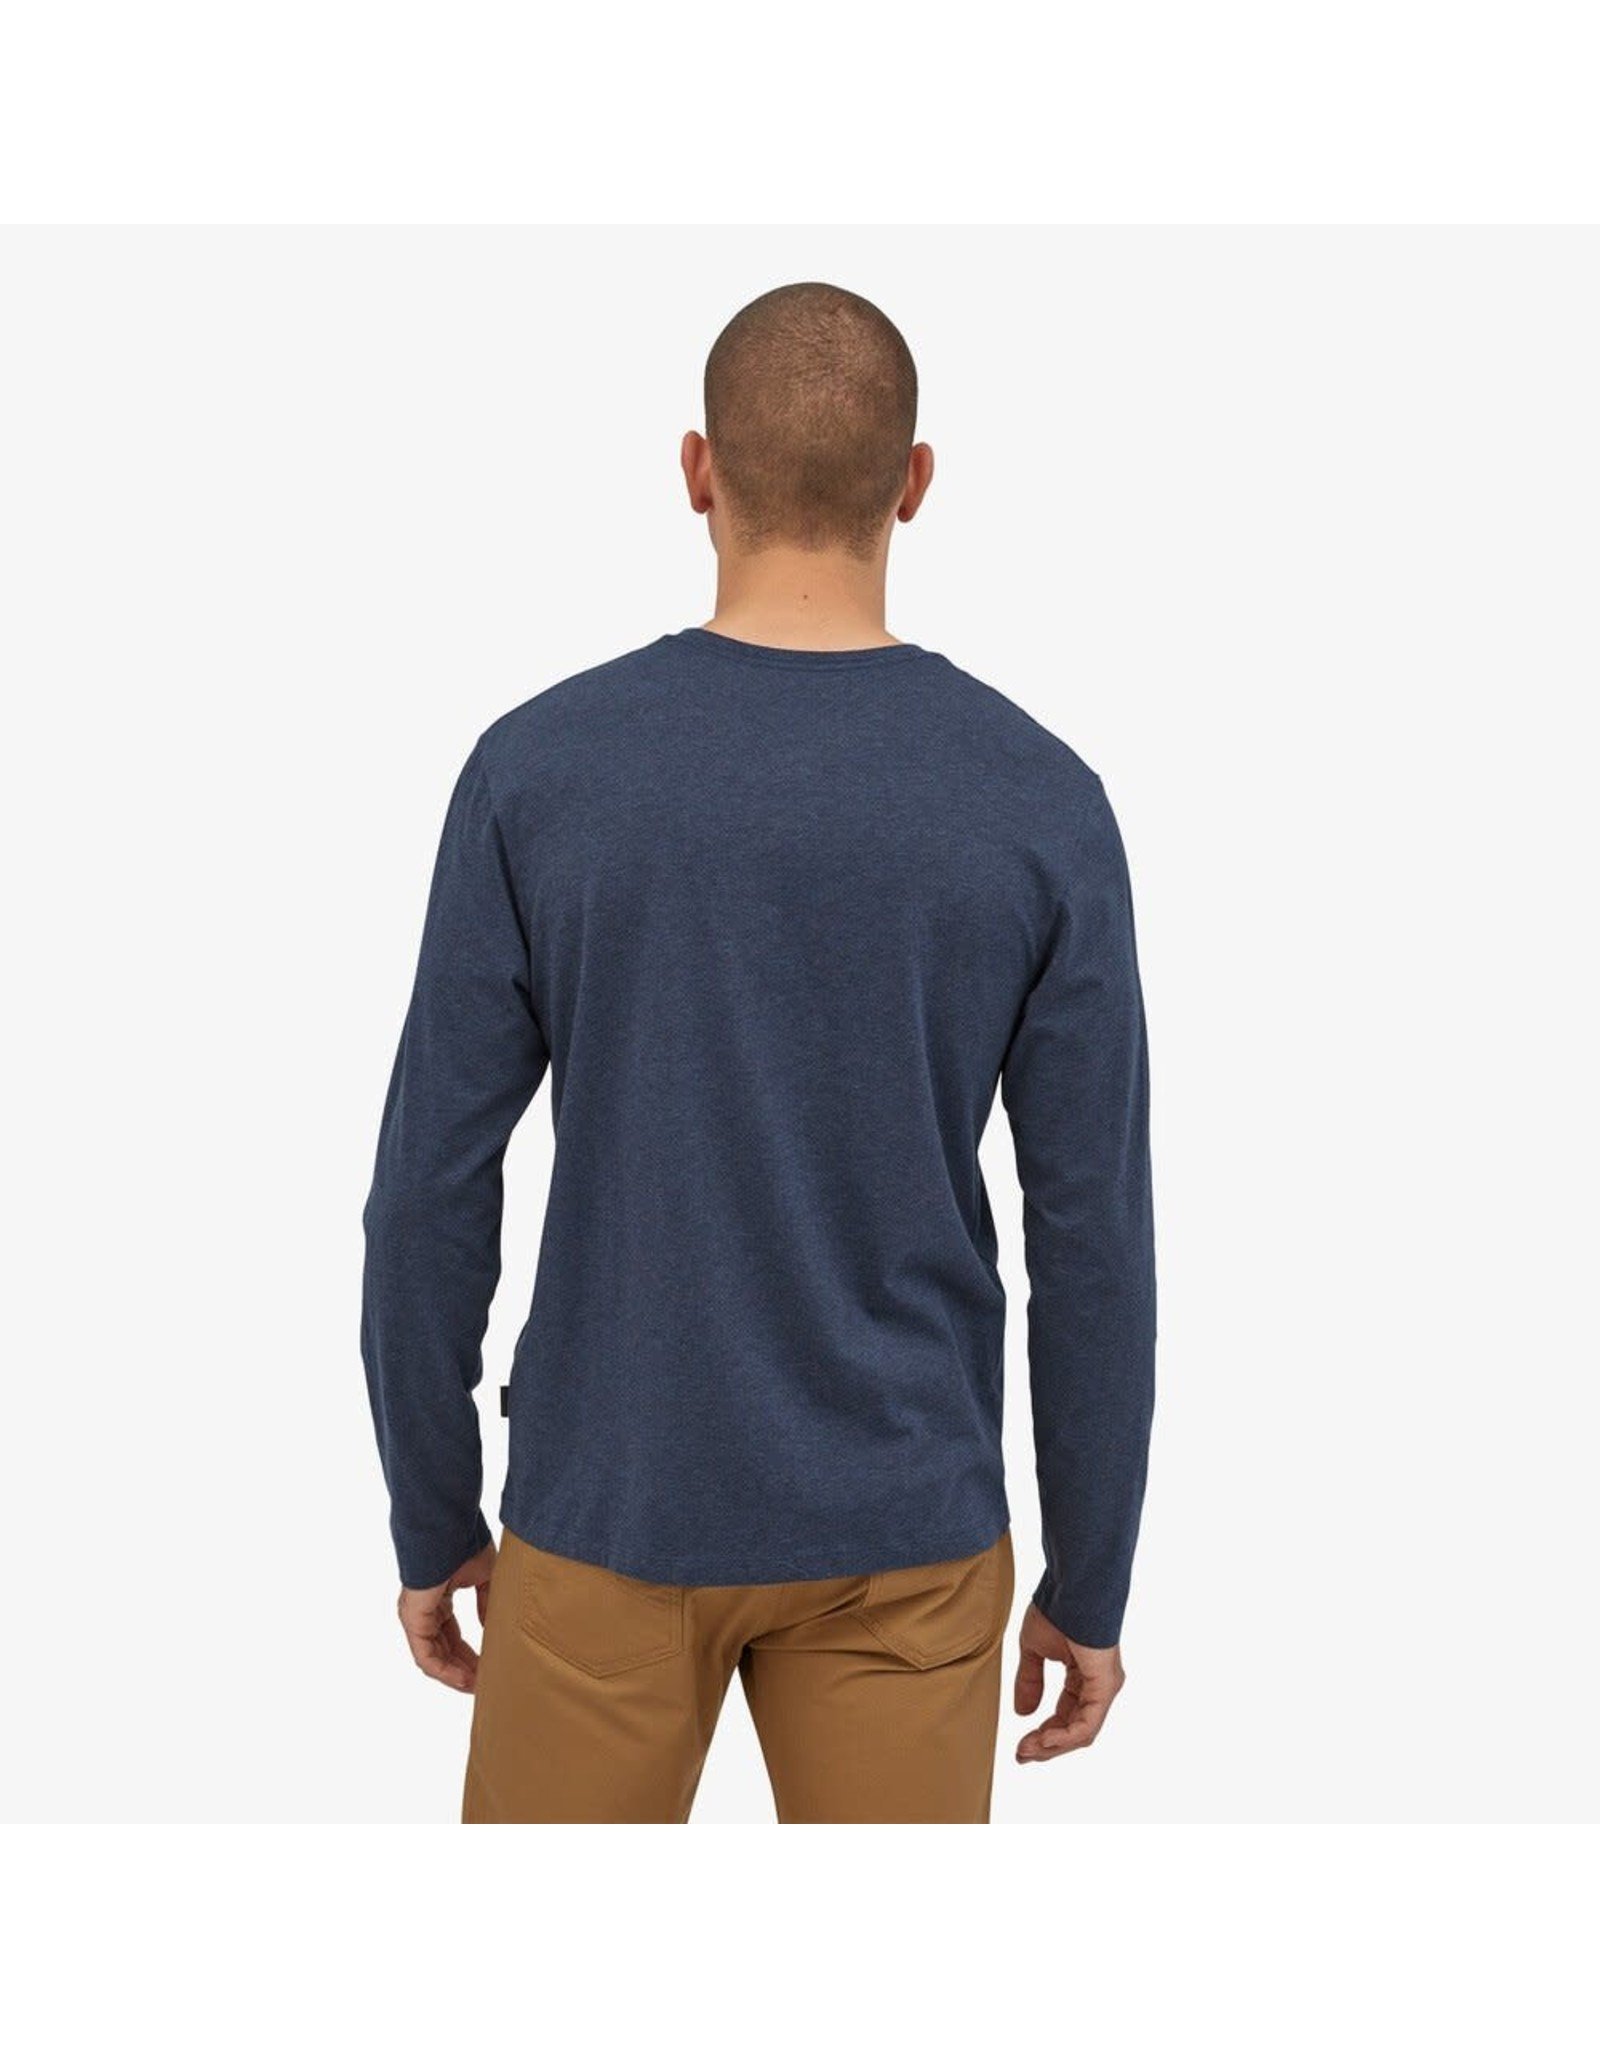 Patagonia Men's LS Organic Cotton LW Henley Pullover